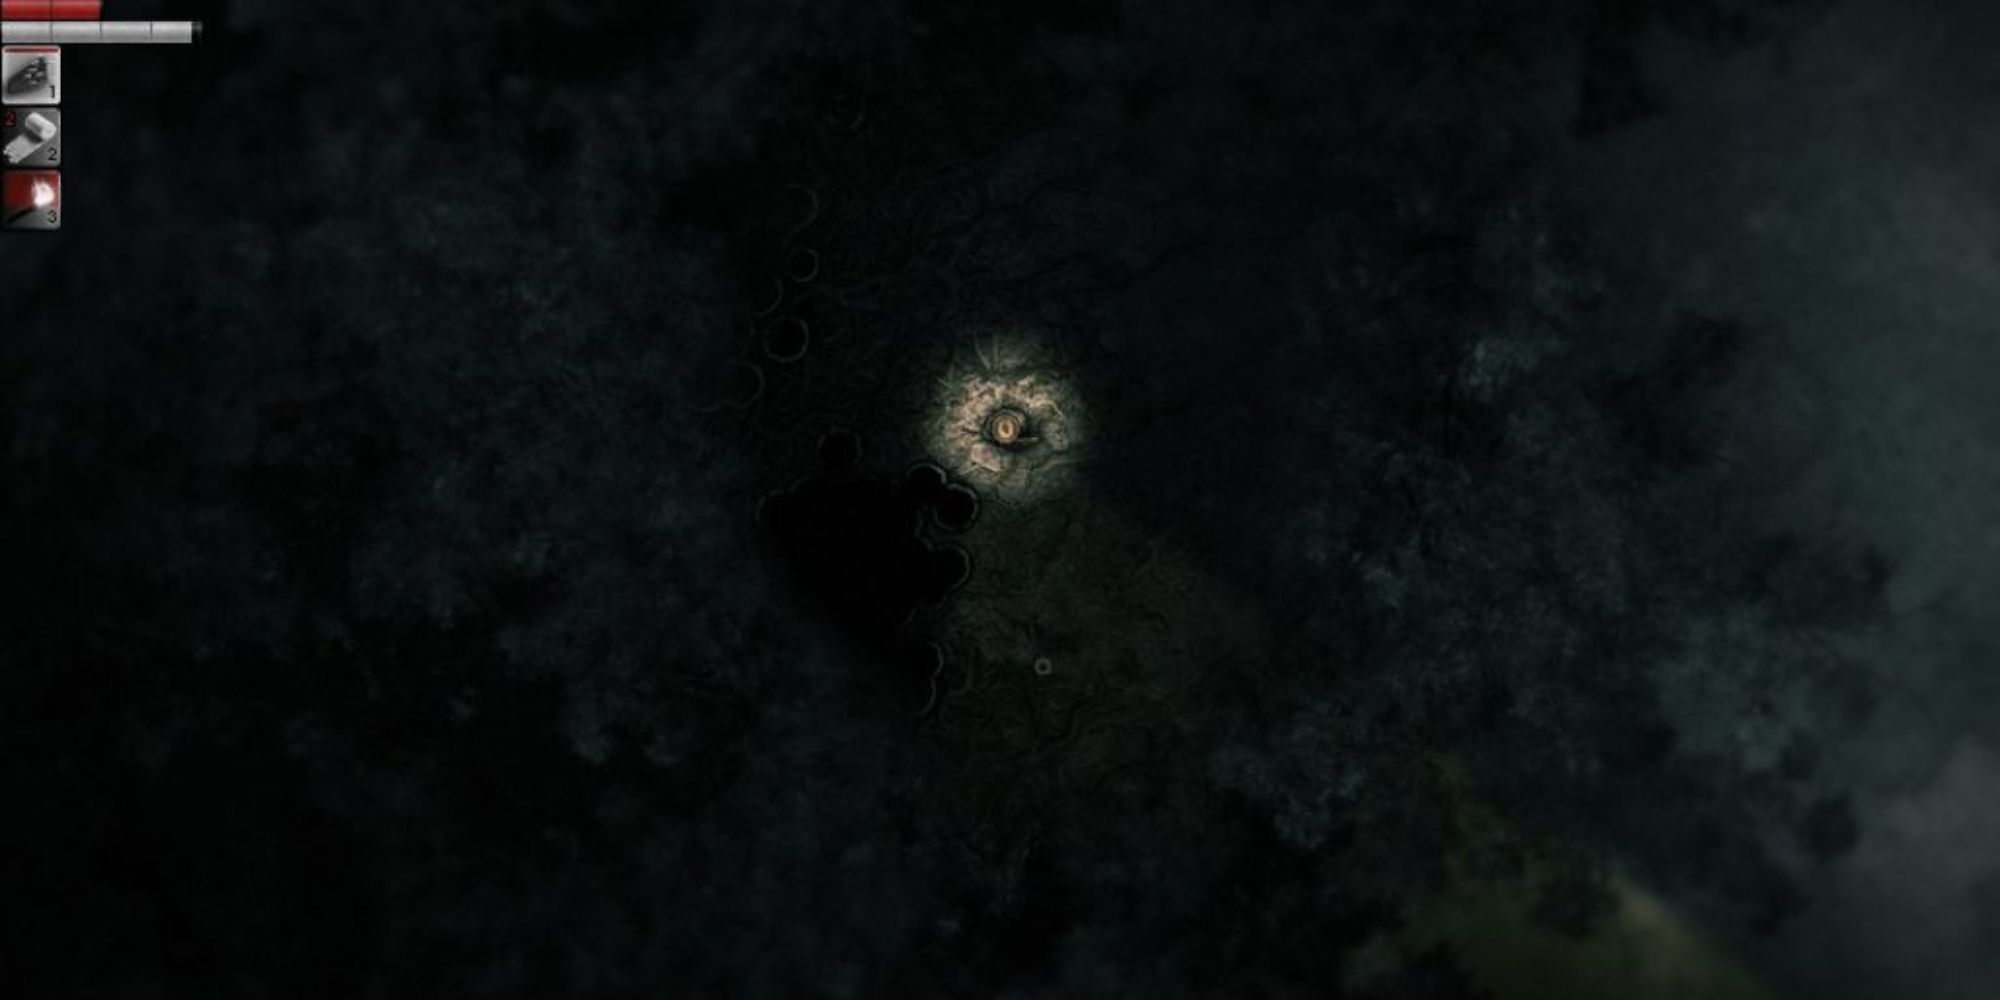 A bird's eye view of a player in Darkwood surrounded by the darkness